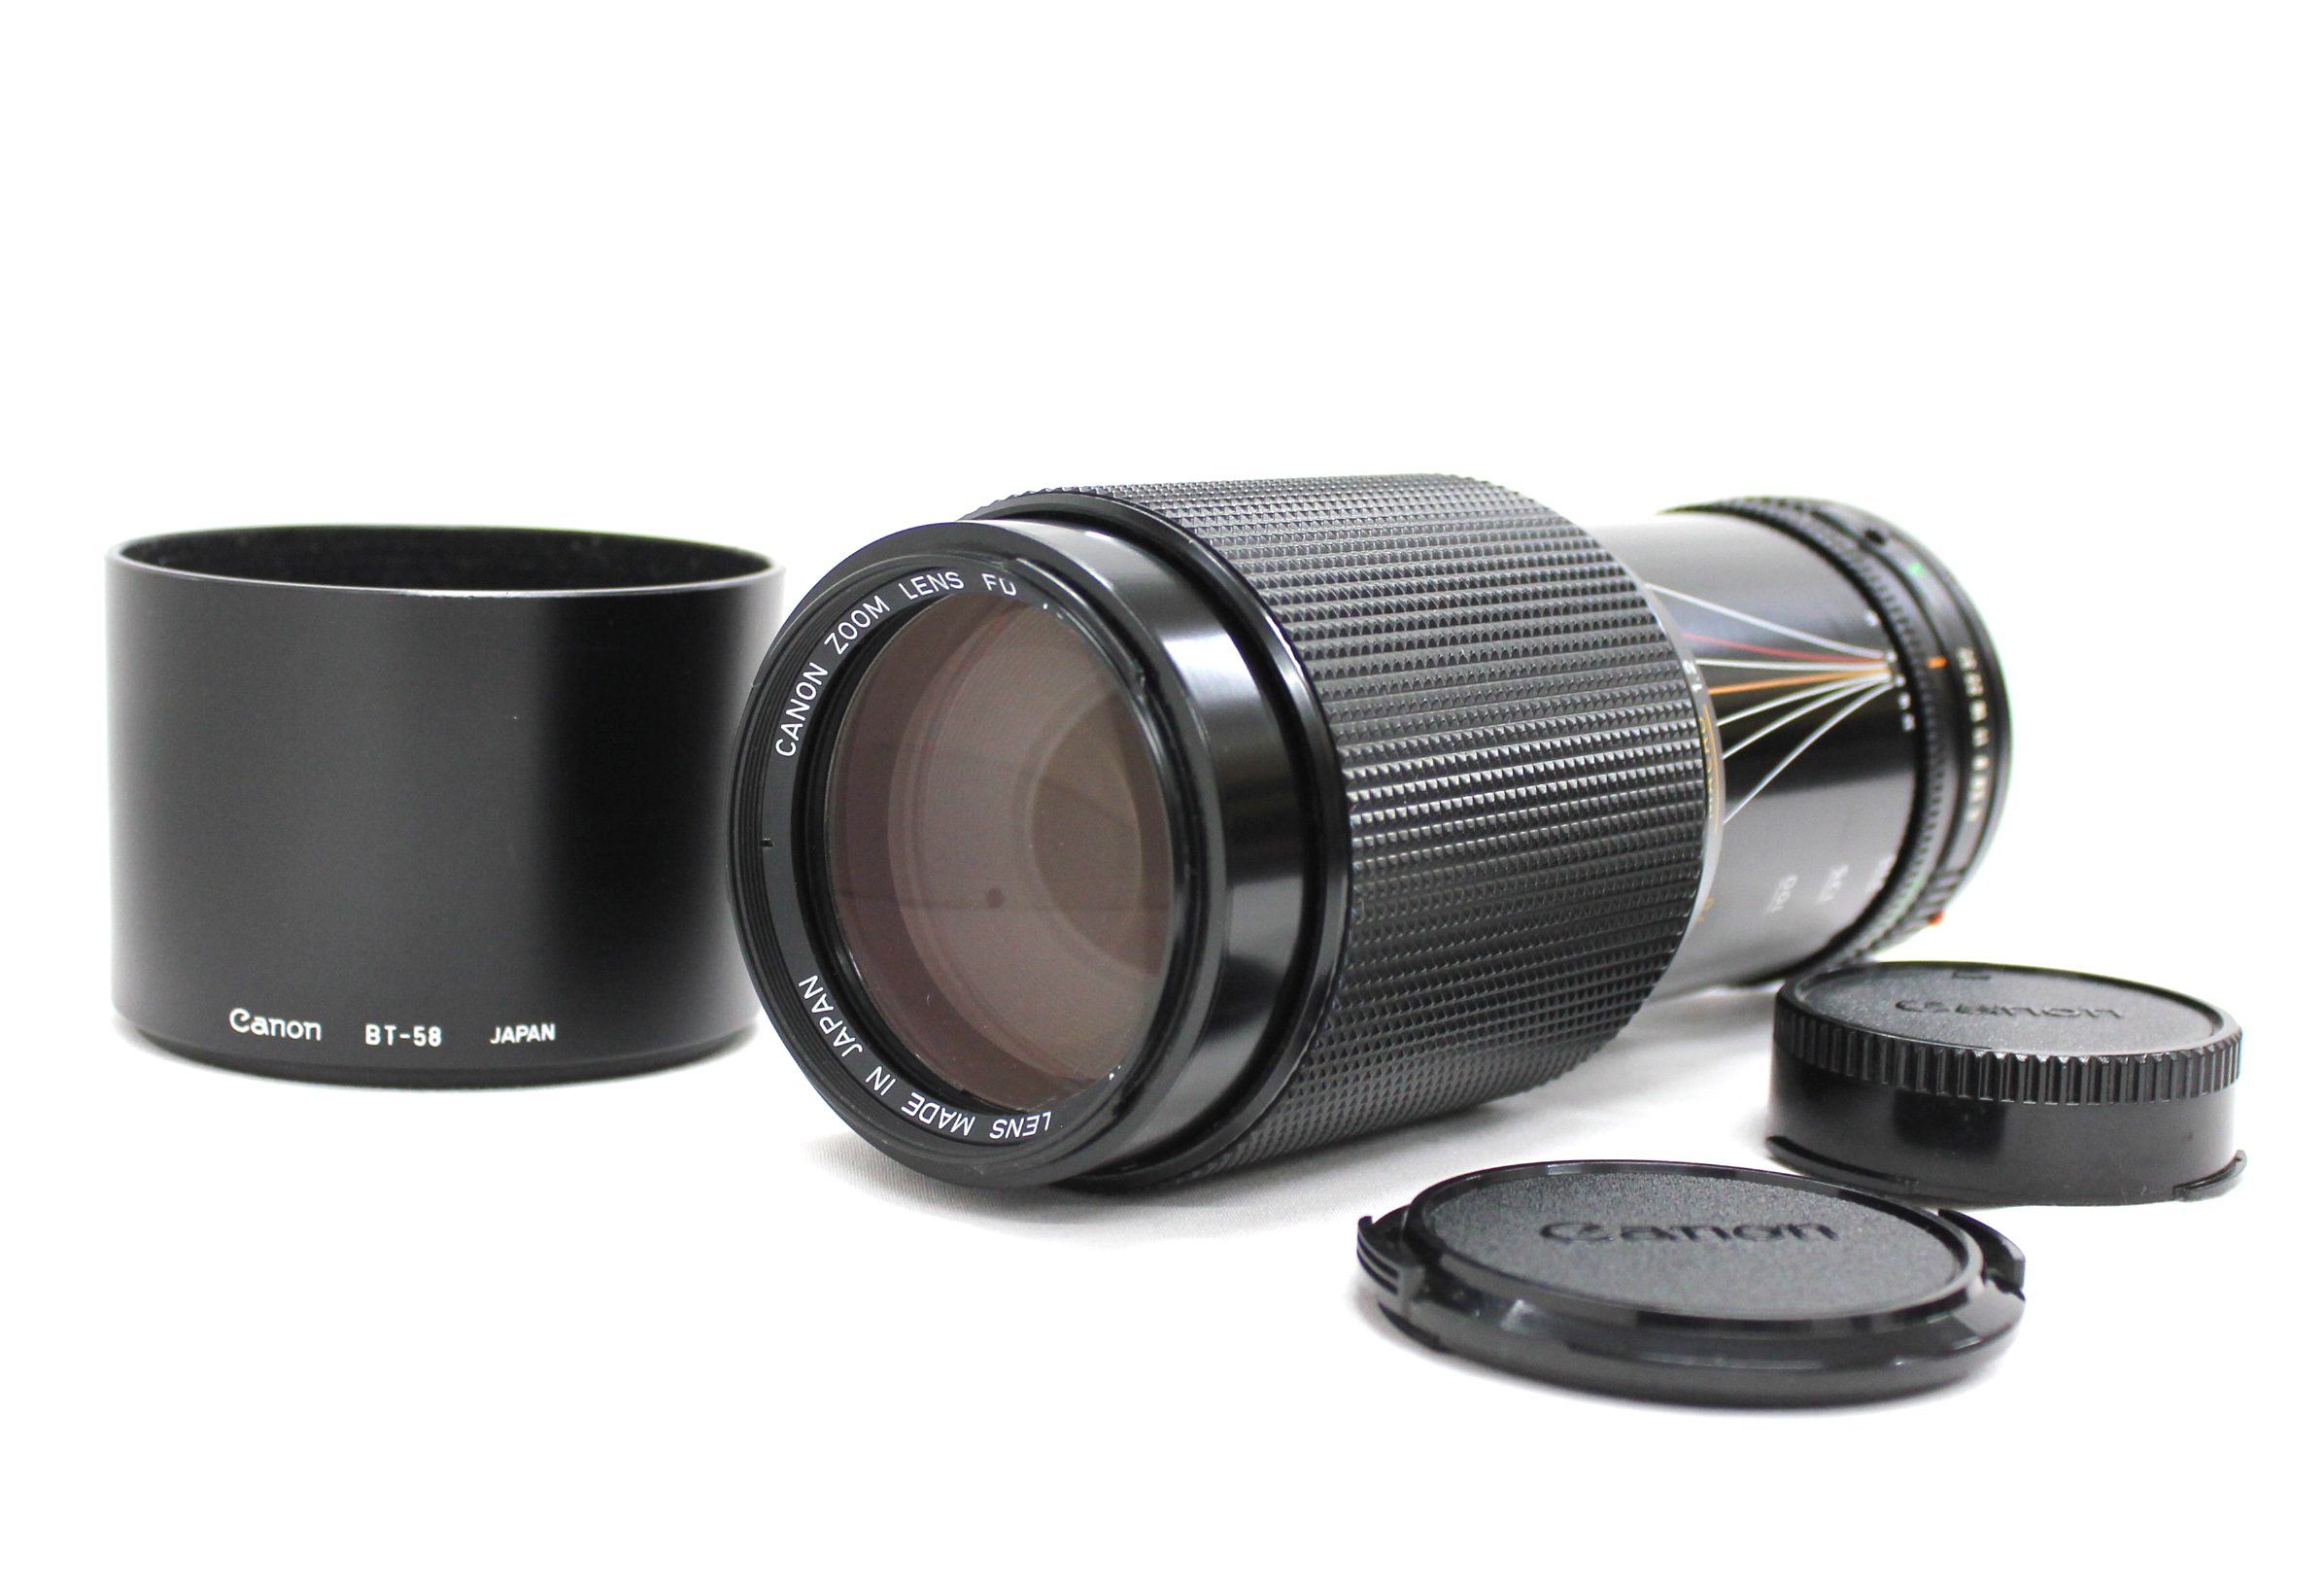 Japan Used Camera Shop | [Mint] Canon New FD NFD 70-210mm F4 Zoom Macro Lens with Lens Hood BT-58 from Japan